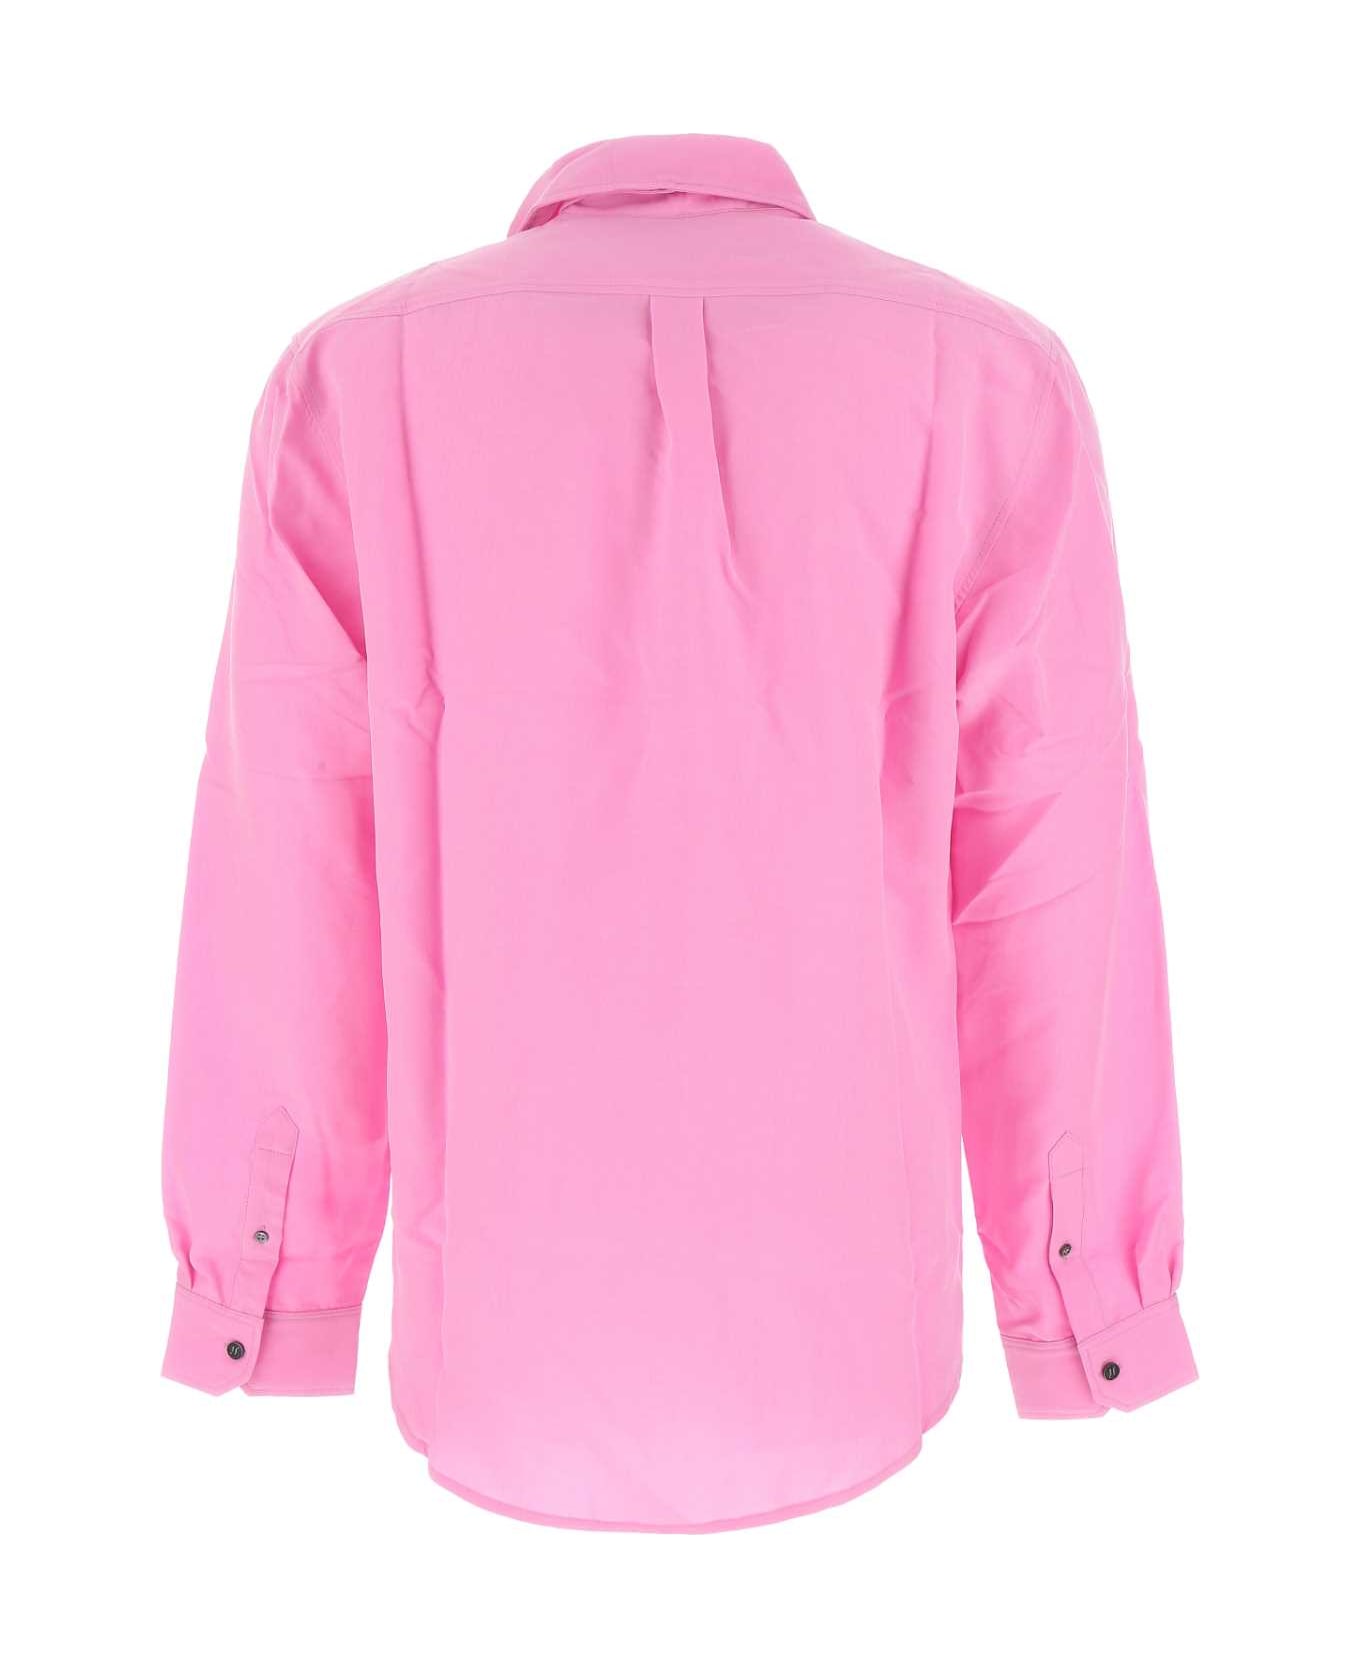 Y/Project Pink Cupro Shirt - PINK